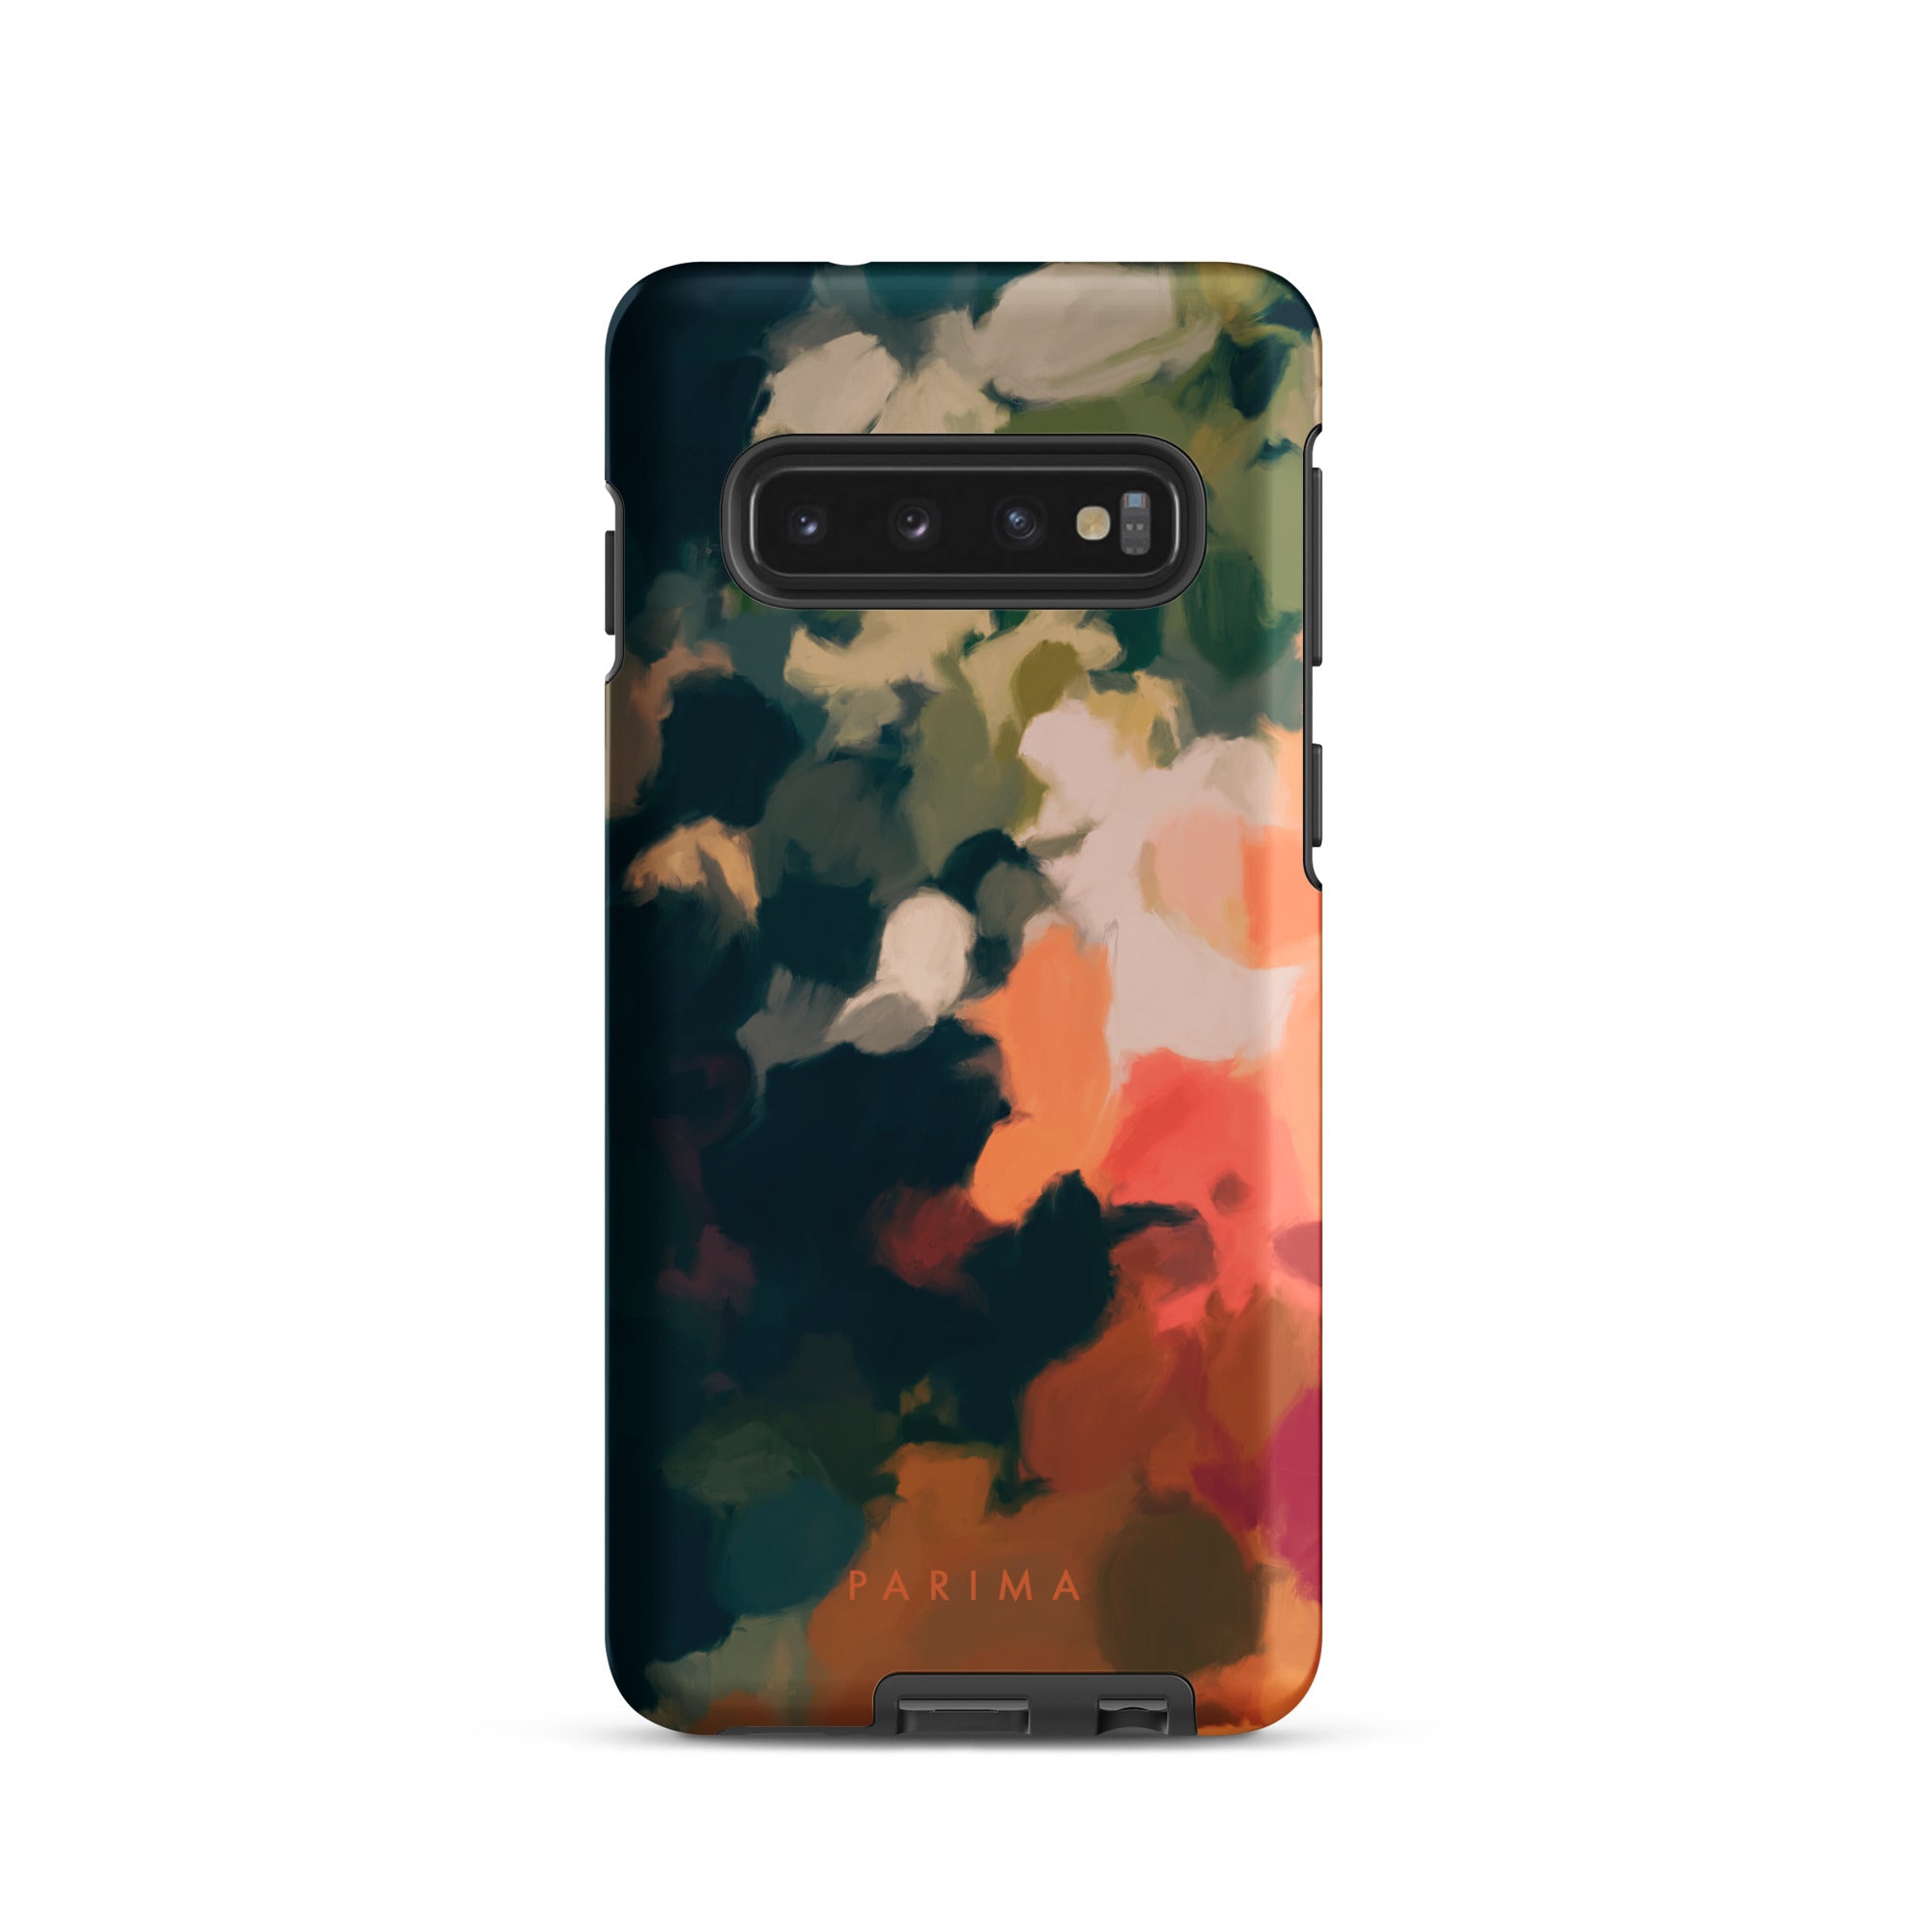 Ria, blue and orange abstract art on Samsung Galaxy S10 tough case by Parima Studio